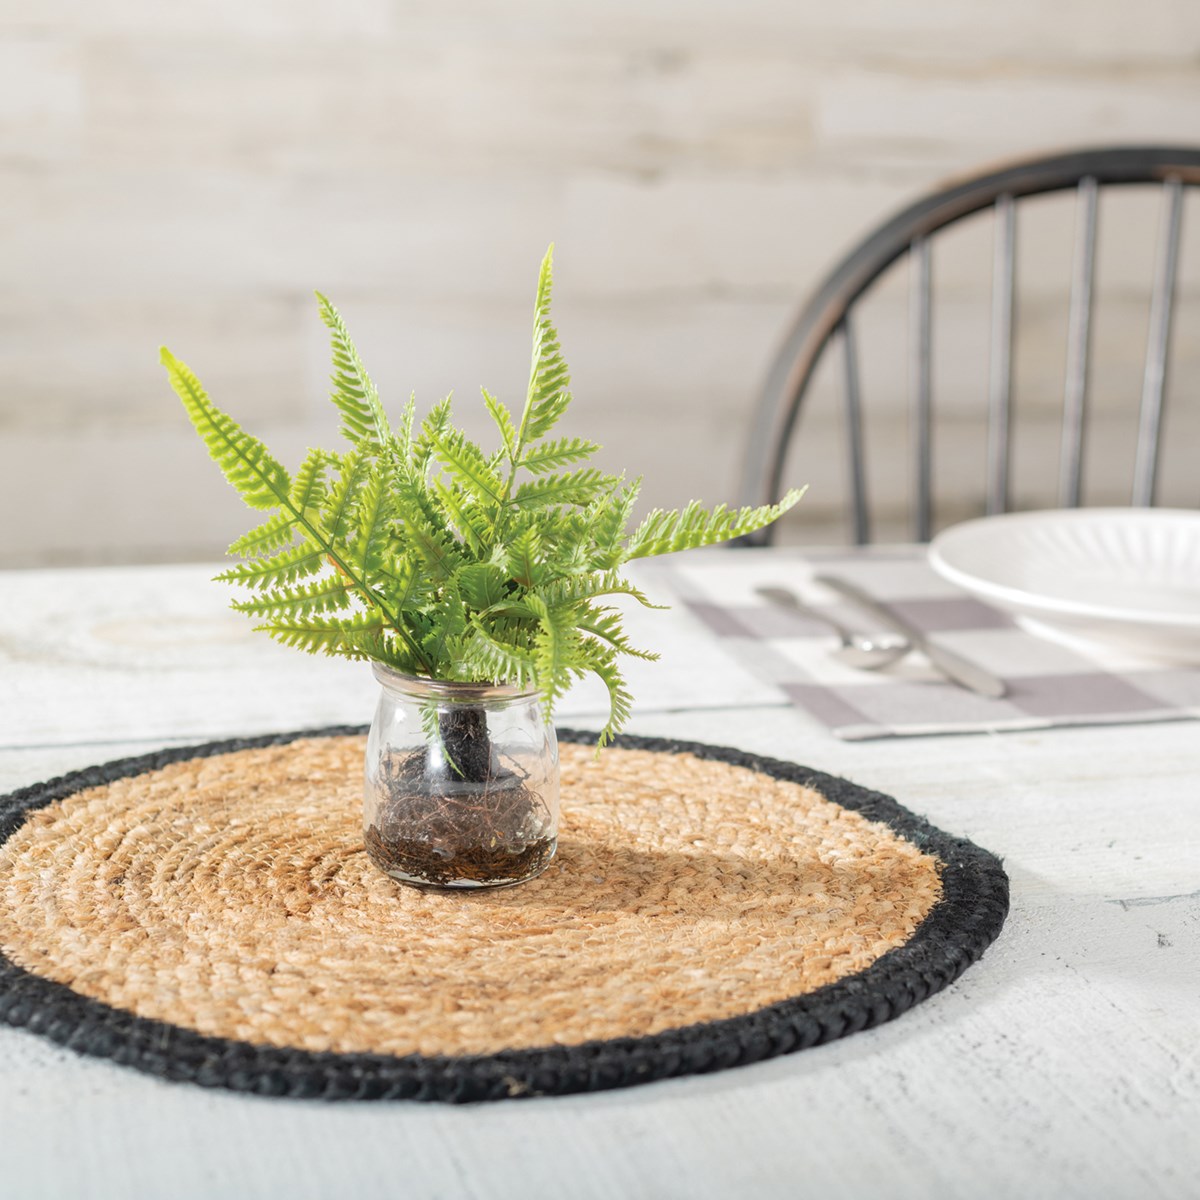 Braided With Trim Placemat - Jute